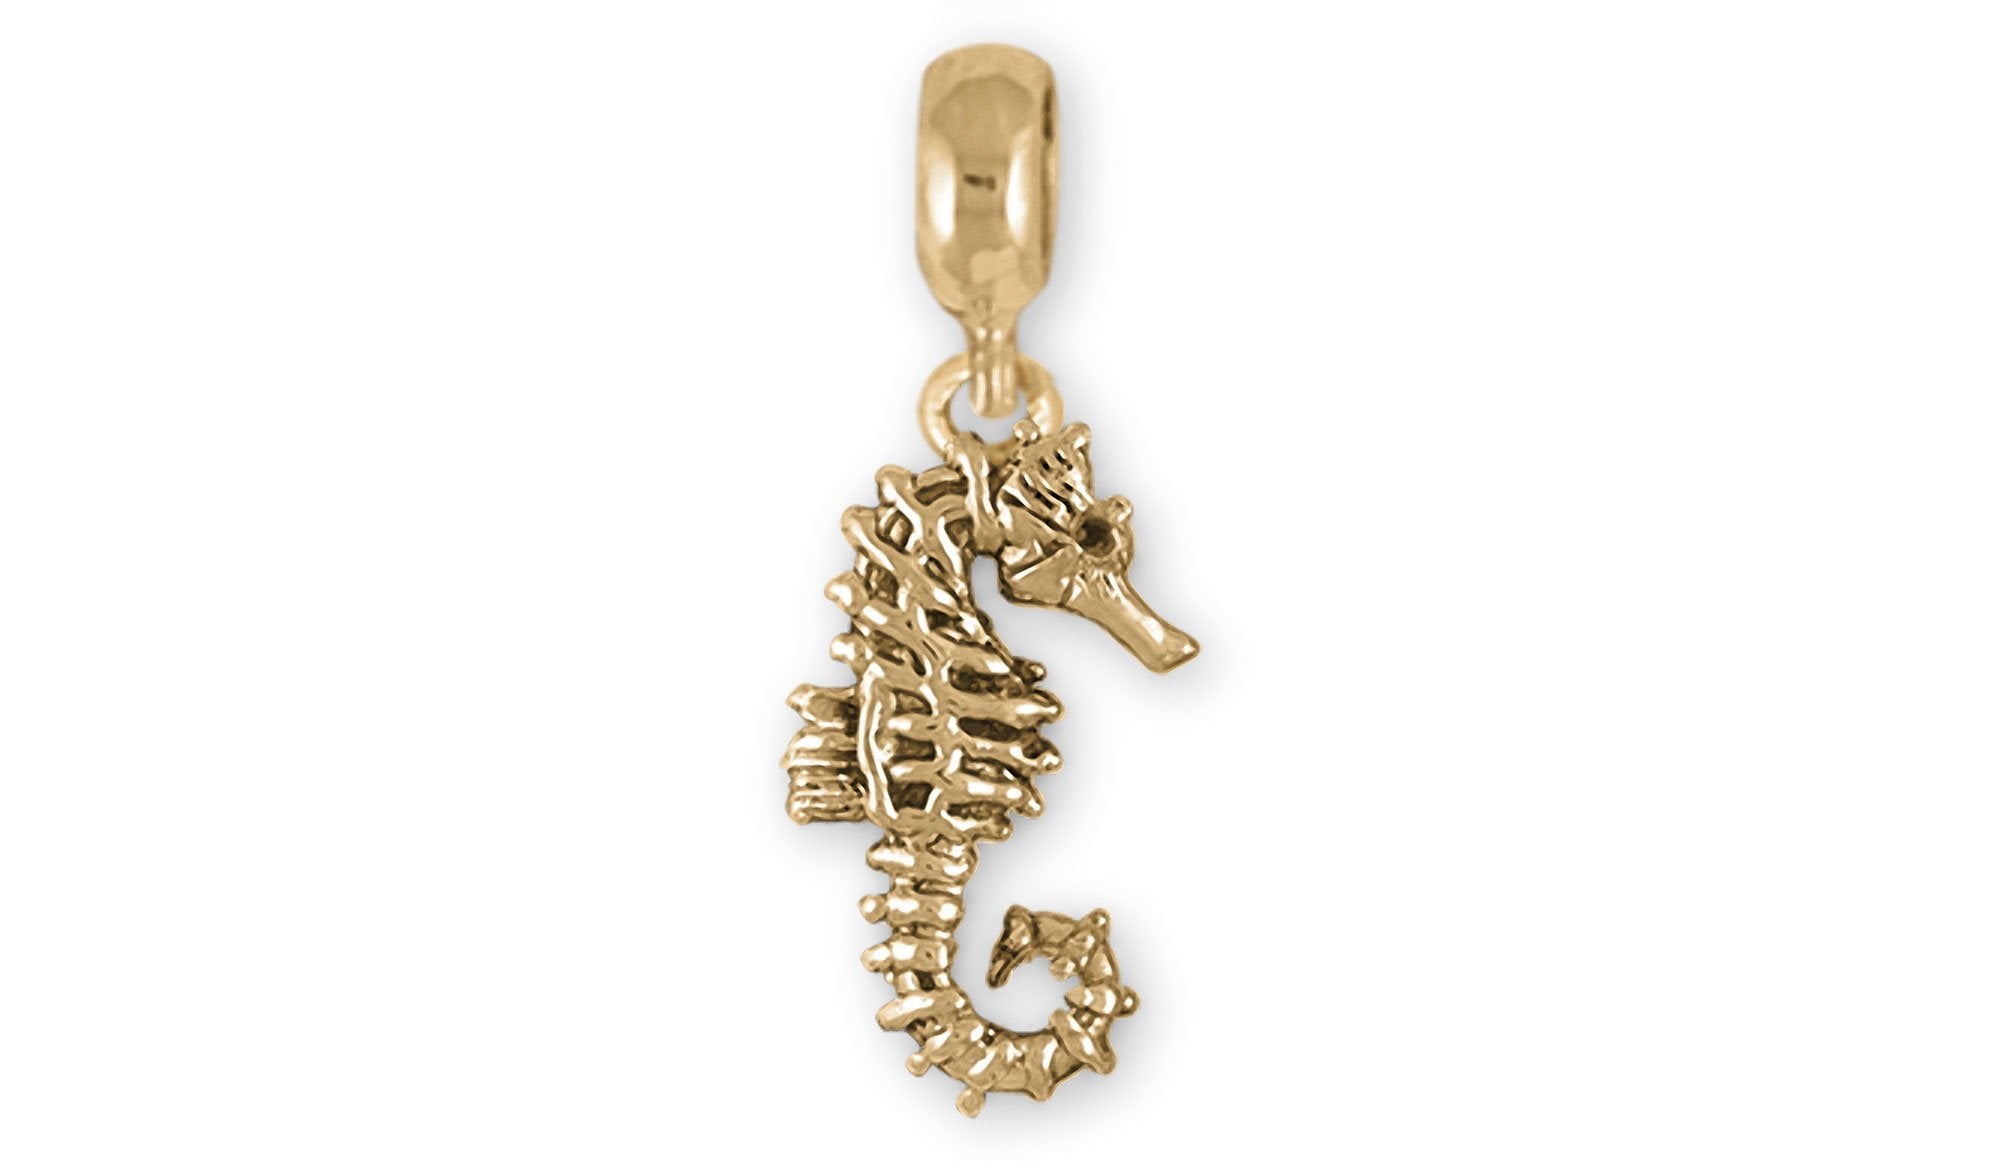 14K Solid Gold Tiny Seahorse Flat Back Earring